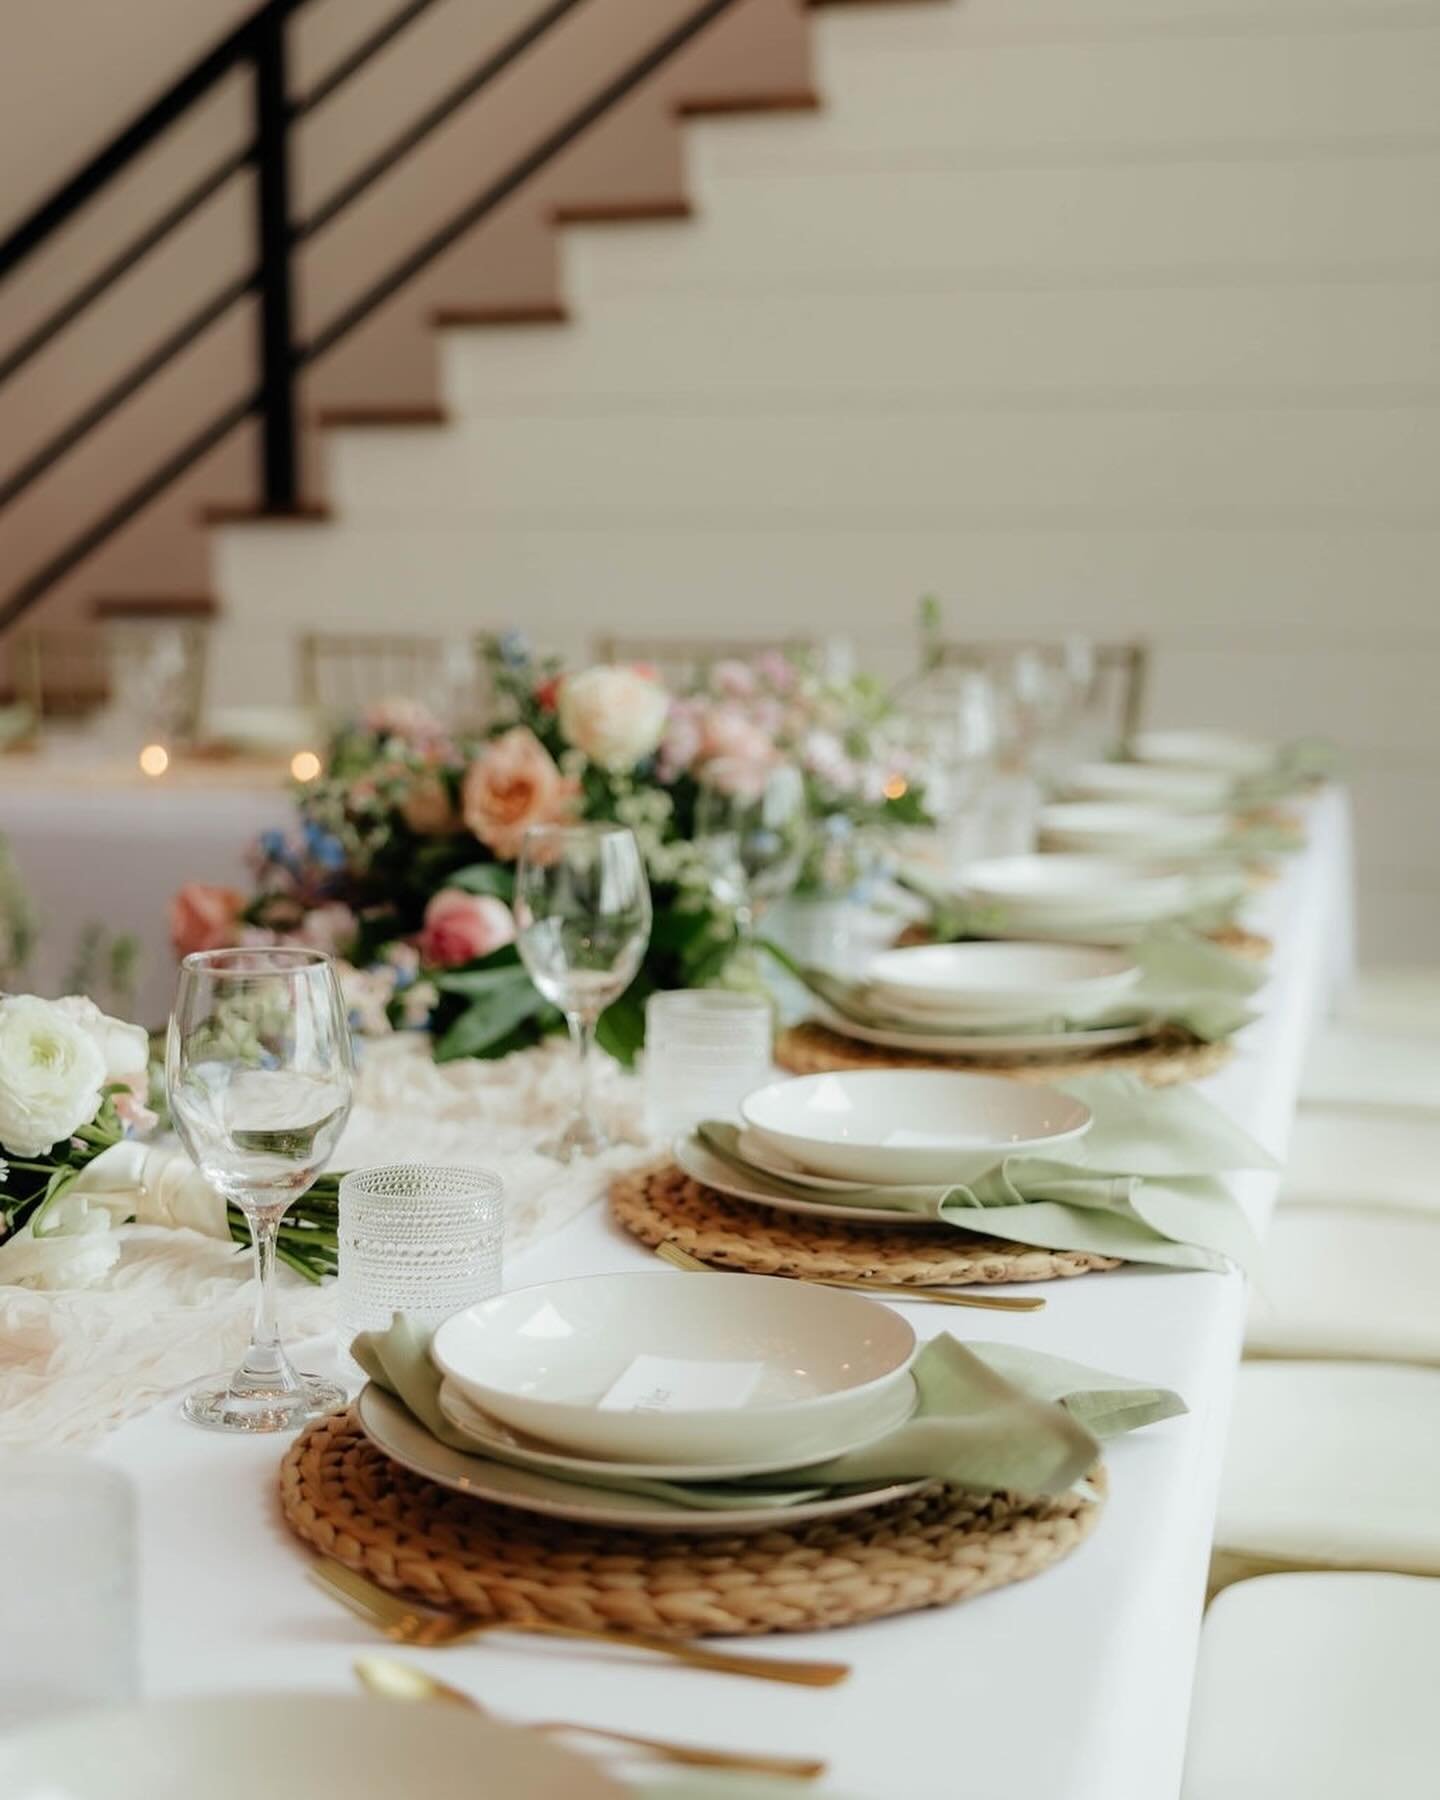 The details of Anita and Mason&rsquo;s wedding day had us swooning! Steal their secrets⬇️
⠀⠀⠀⠀⠀⠀⠀⠀⠀
&gt;&gt;Layers
A stunning table design begins with layers. Incorporate various textures using a runner, charger, paper goods, and florals. This adds i